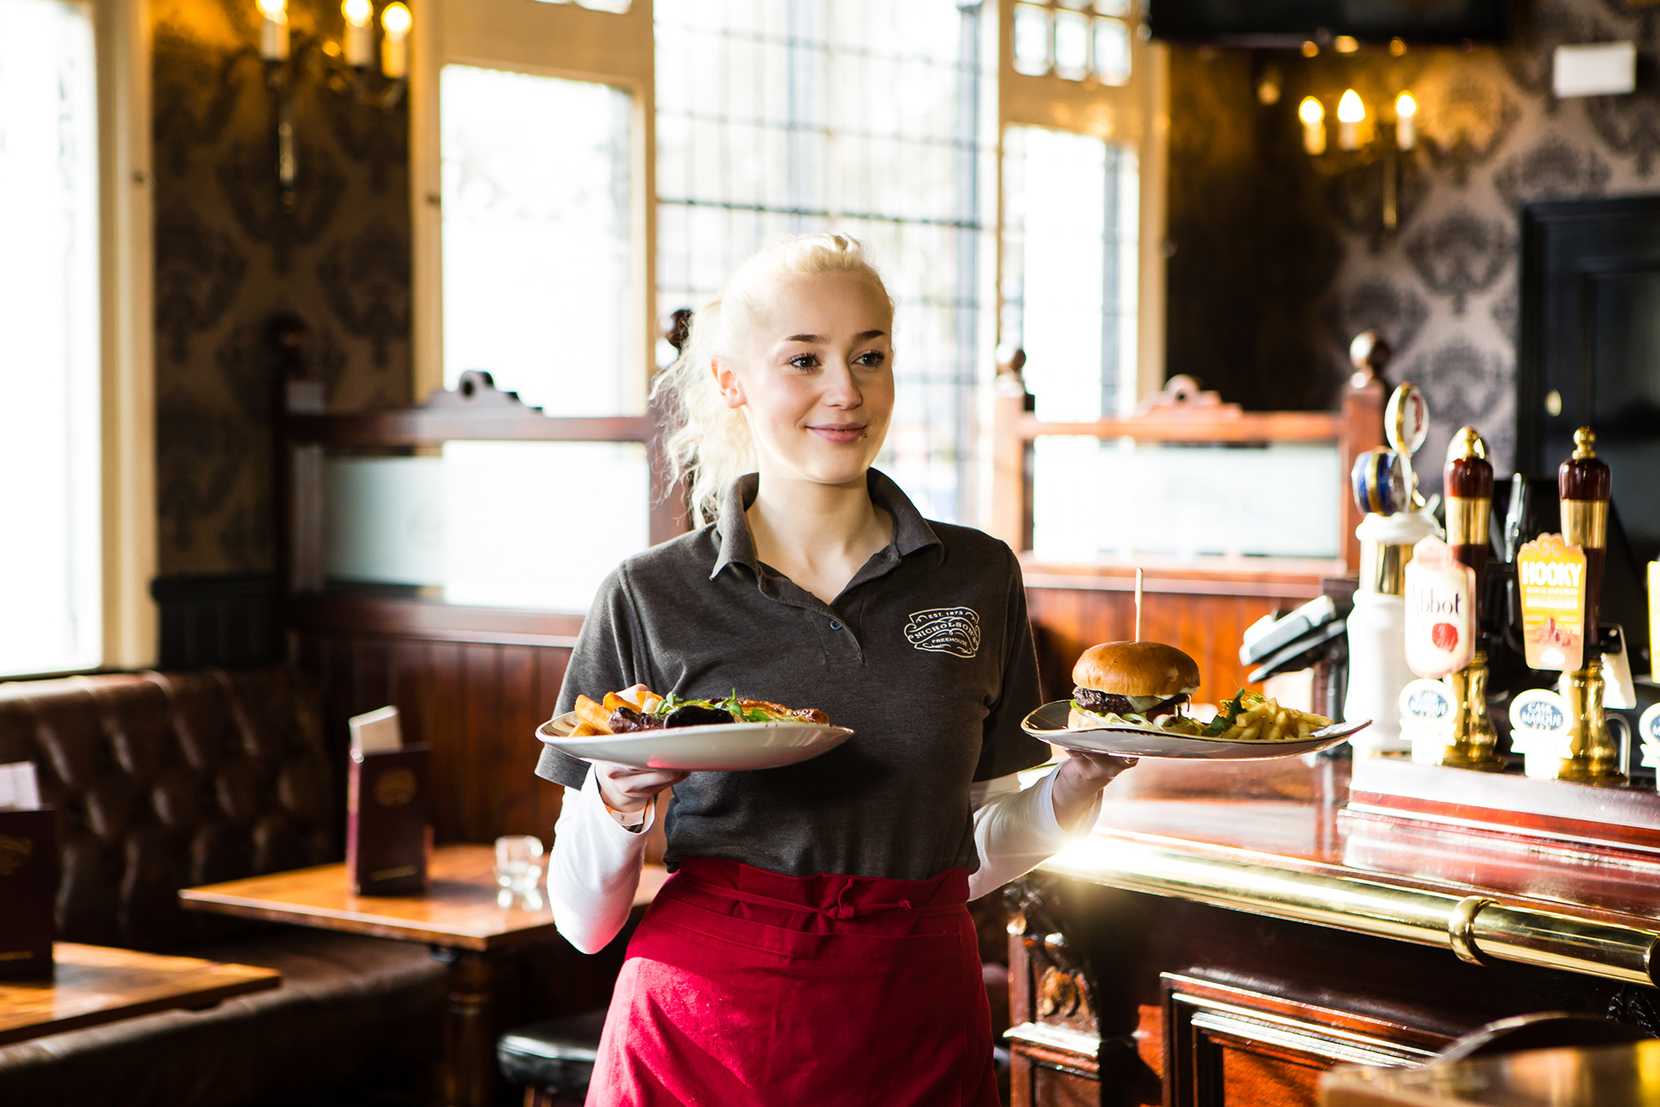 A team member at Nicholson's carries two plates through the pub to waiting guests.